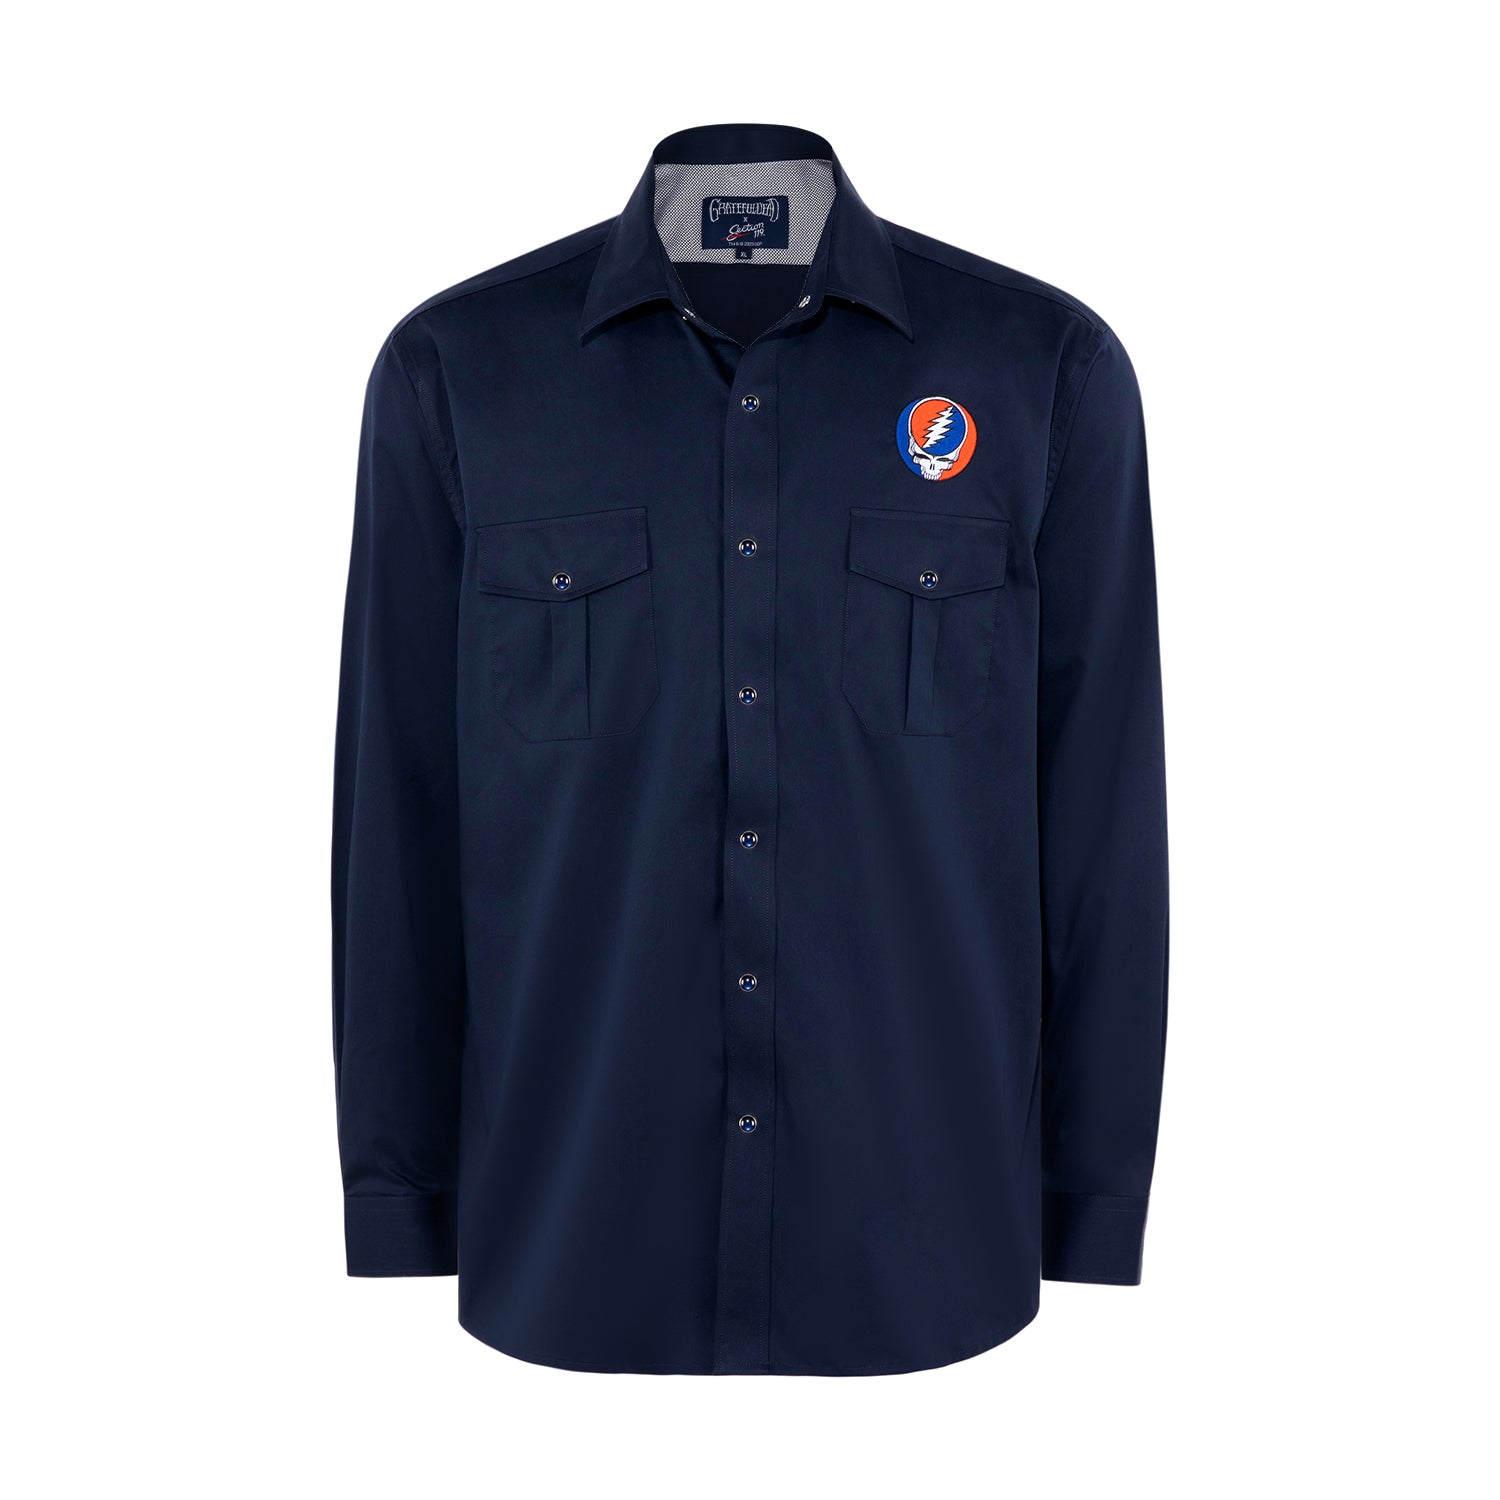 Grateful Dead LSBD SNAPSHIRT STEAL YOUR FACE IN NAVY - Section 119